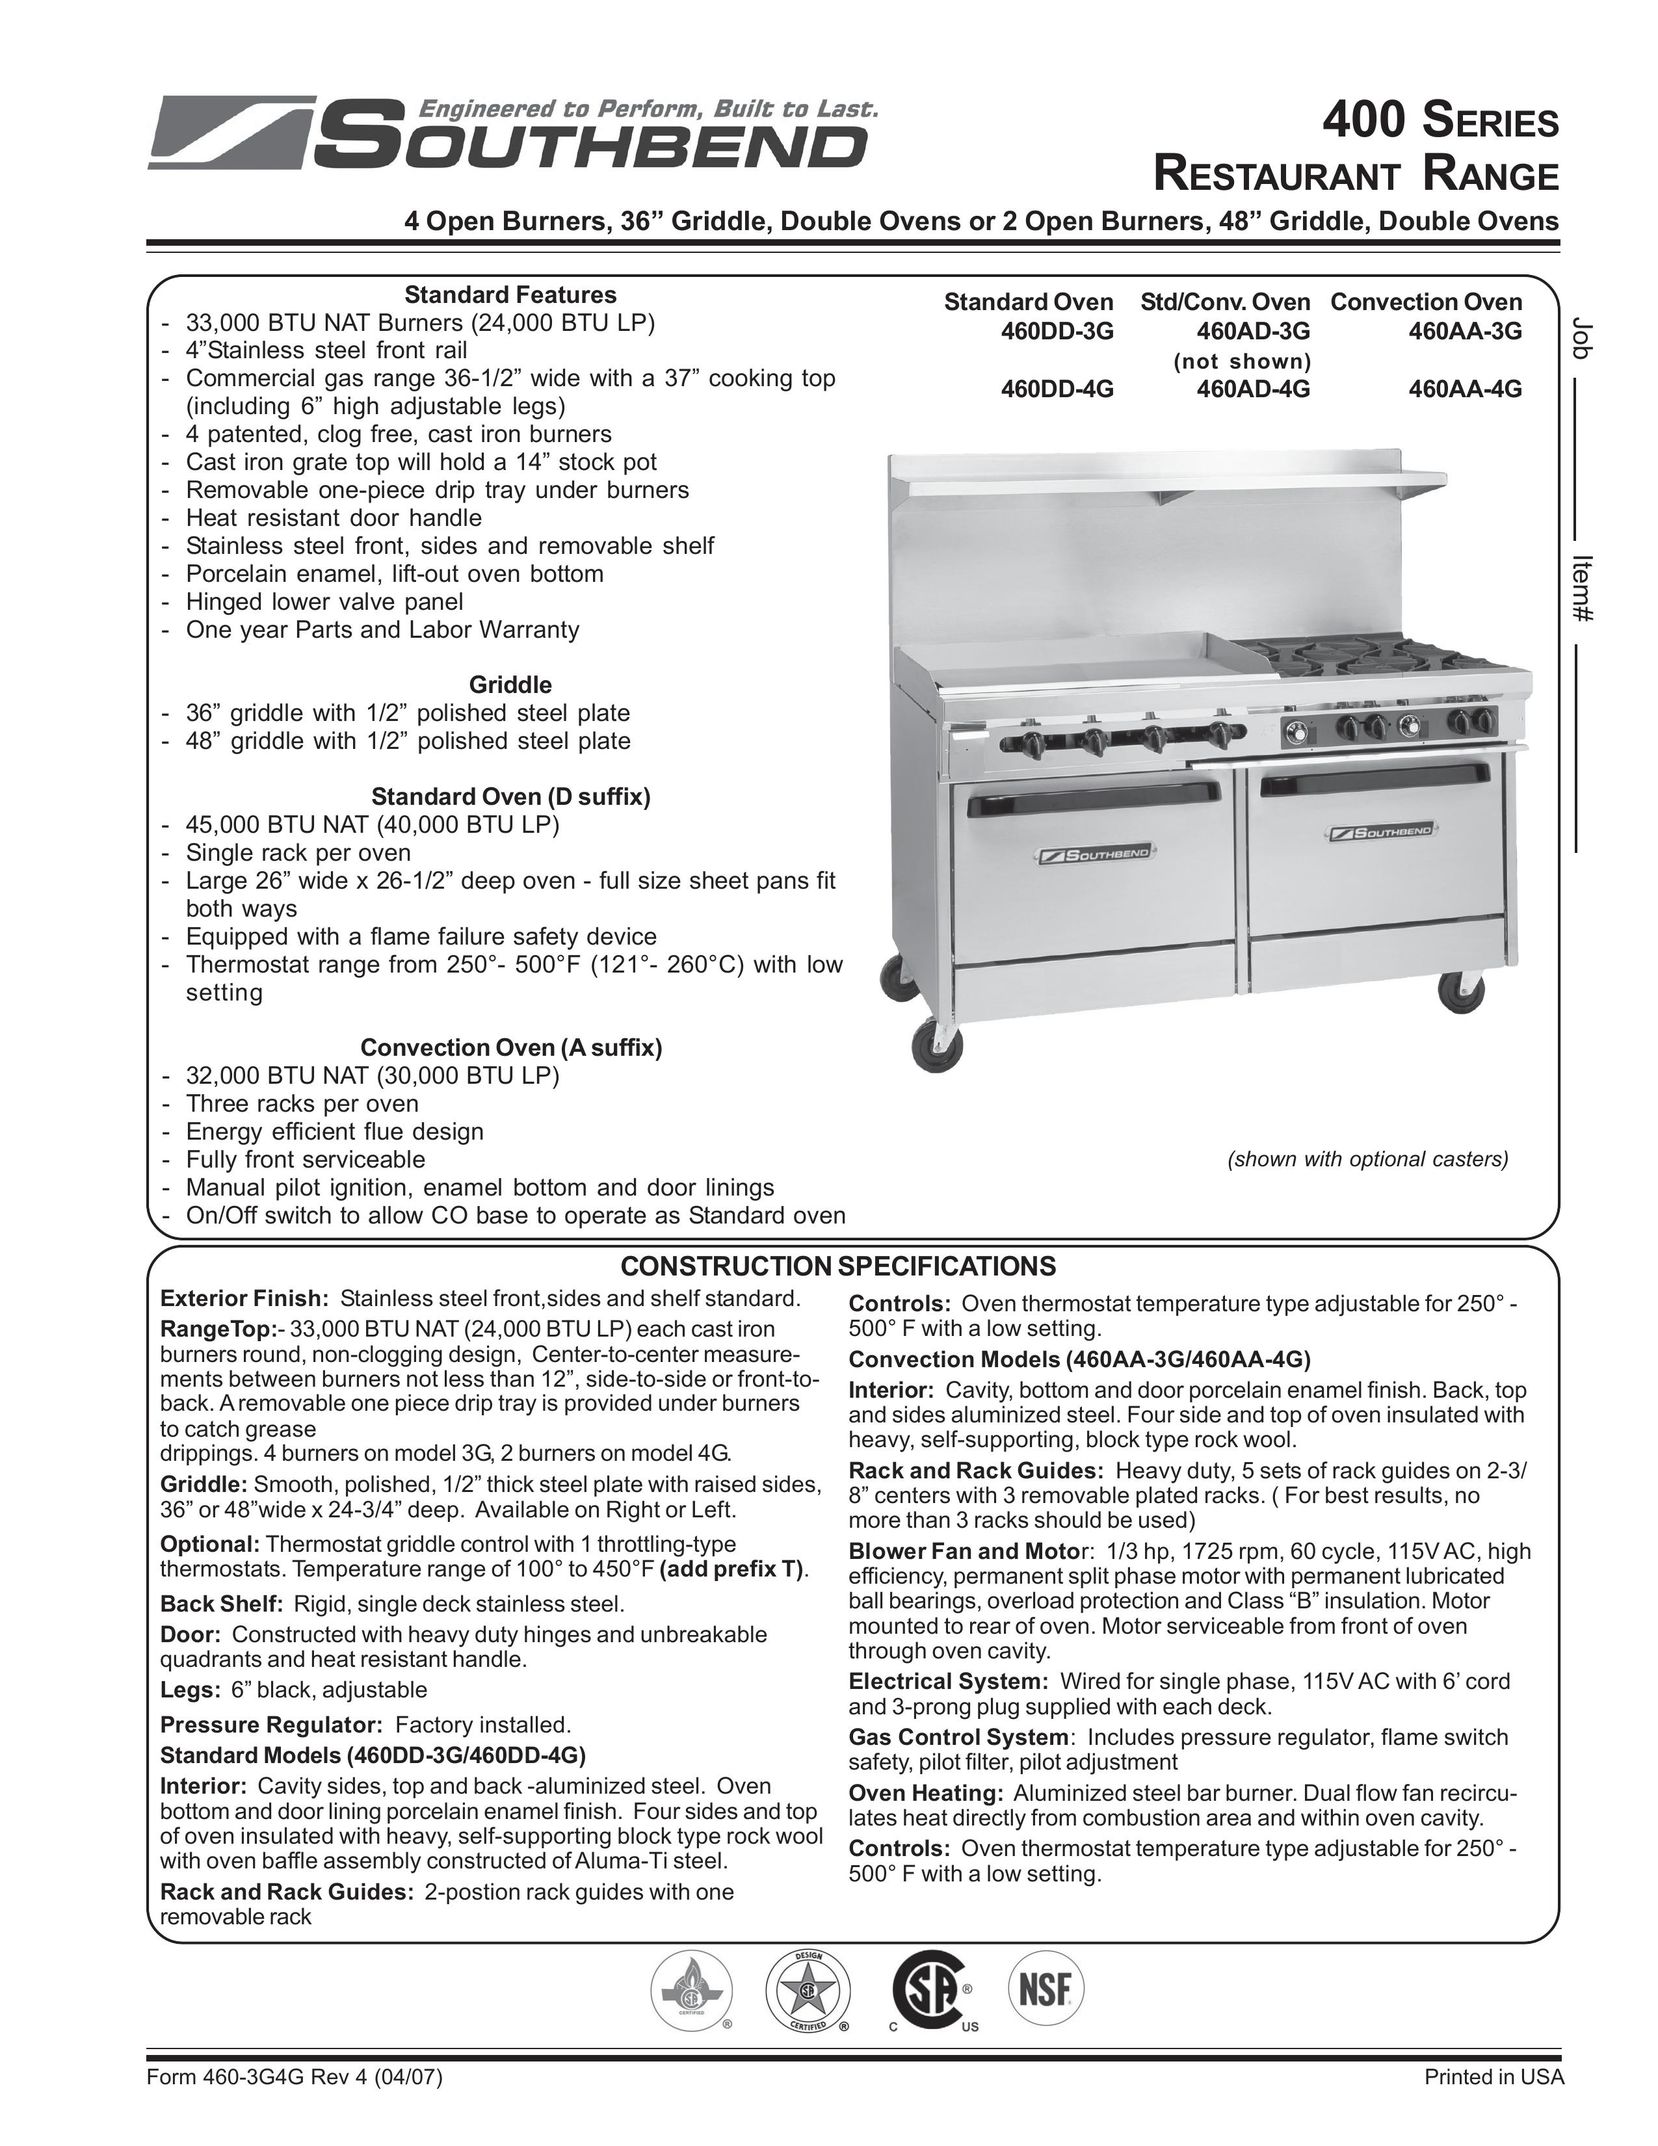 Southbend 460DD-4G Convection Oven User Manual